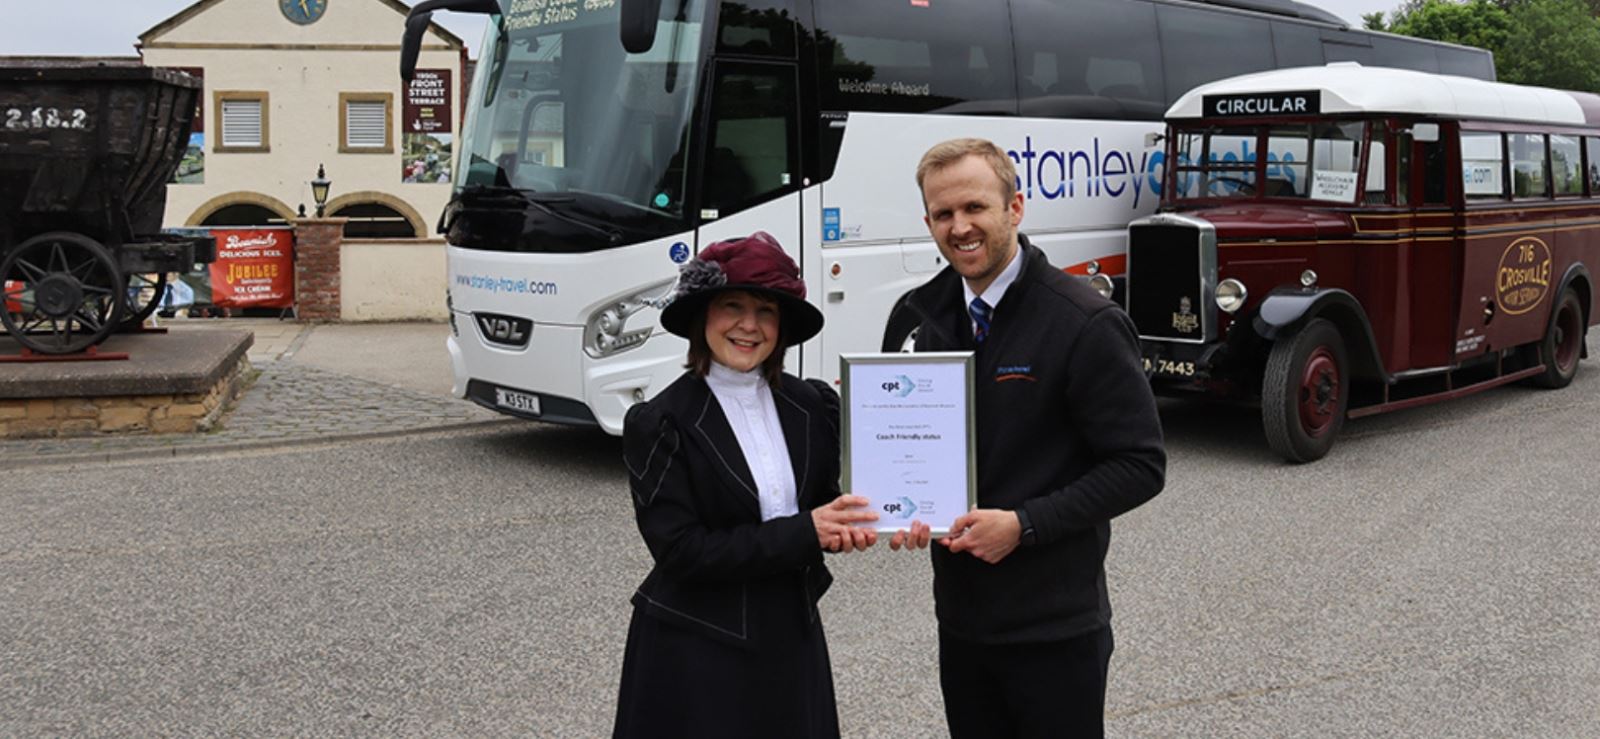 The accreditation was presented to Brenda Alexander, Bookings Officer at Beamish Musuem by Gavin Scott, CPT Regional Vice Chair.